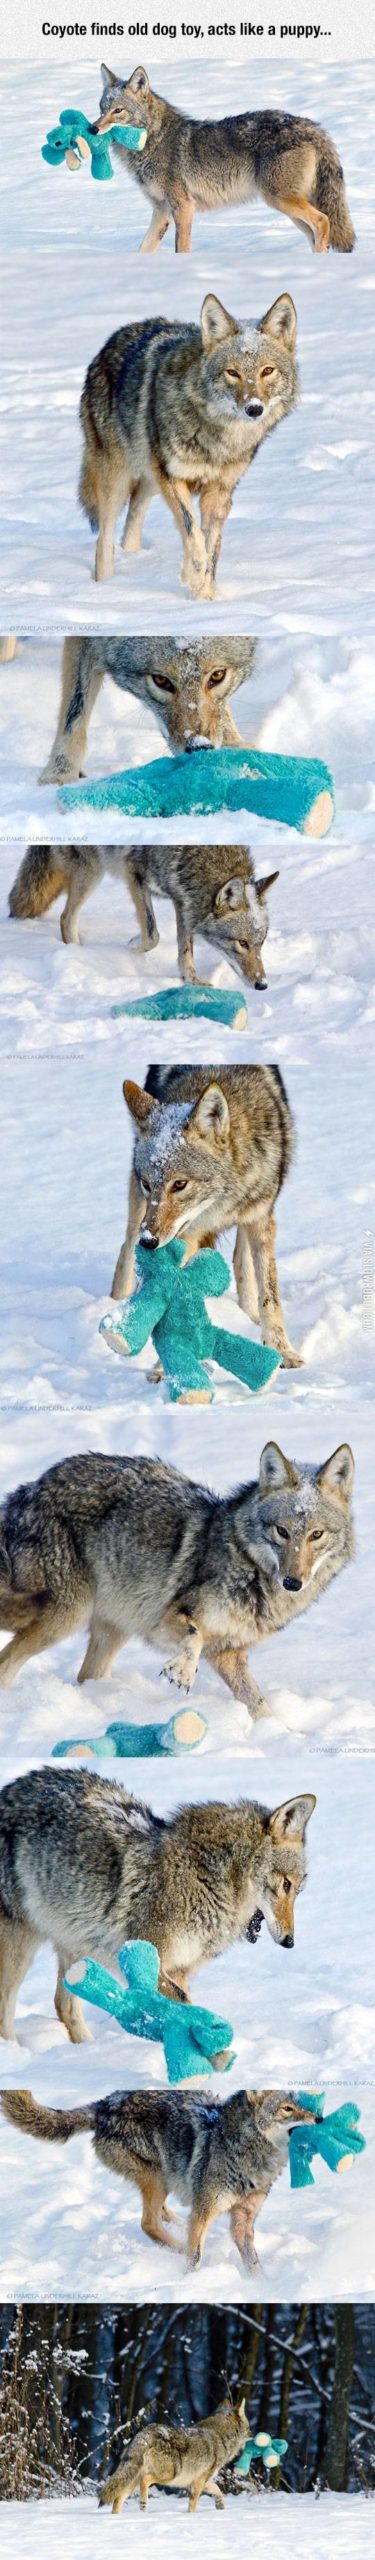 Coyote+finds+old+dog+toy